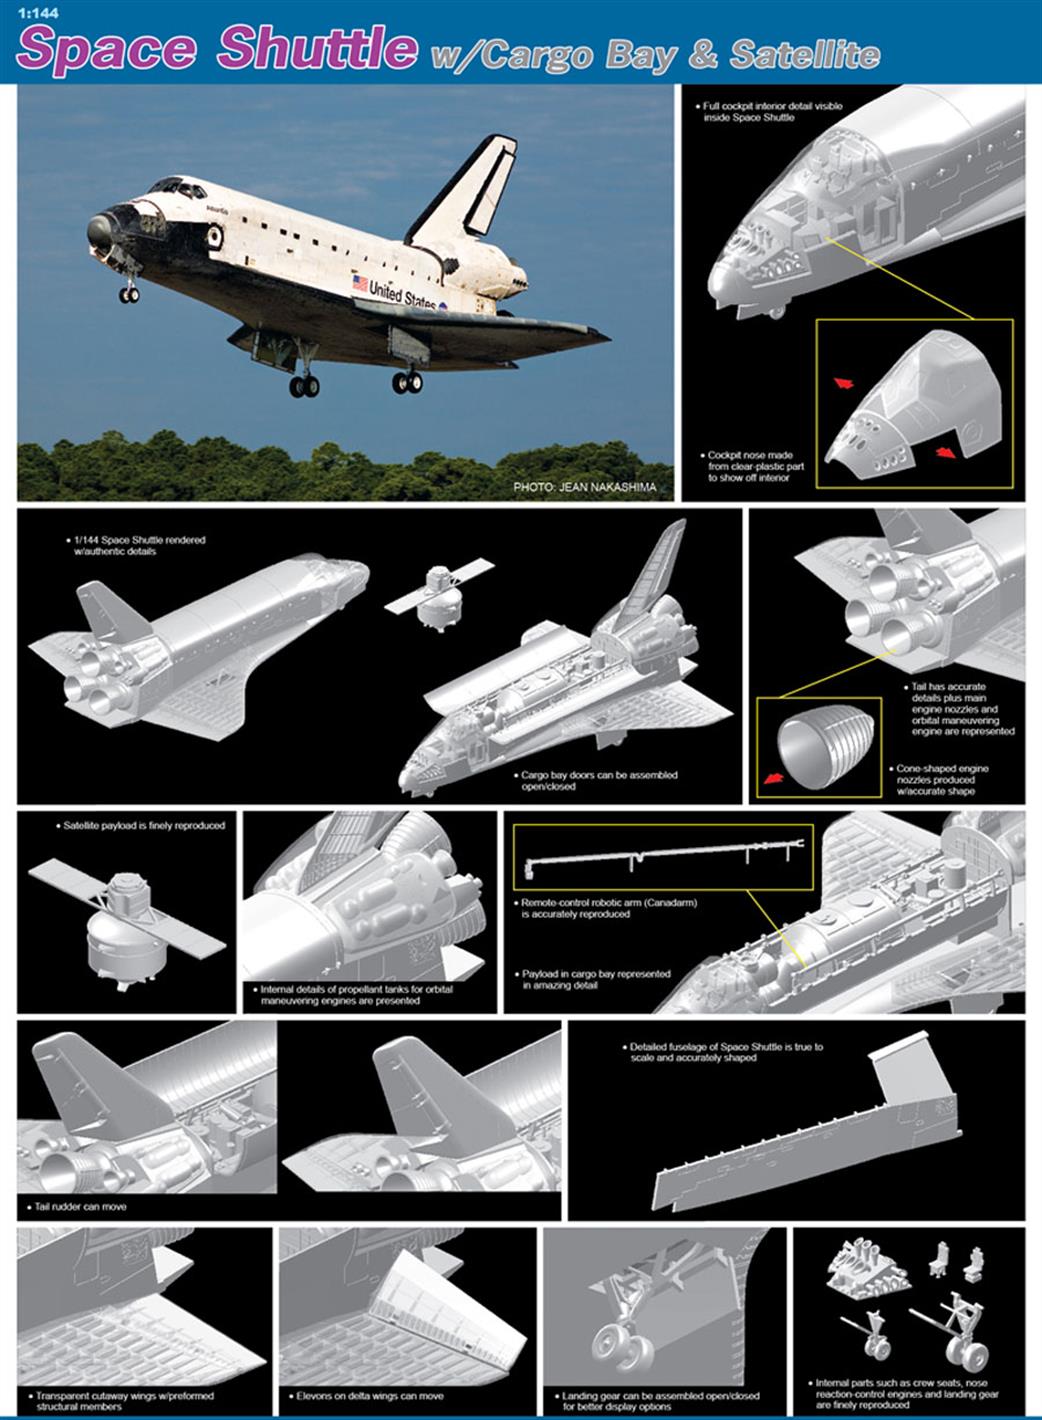 Dragon Models 1/144 11004 Space Shuttle with Cargo Bay & Satellite kit